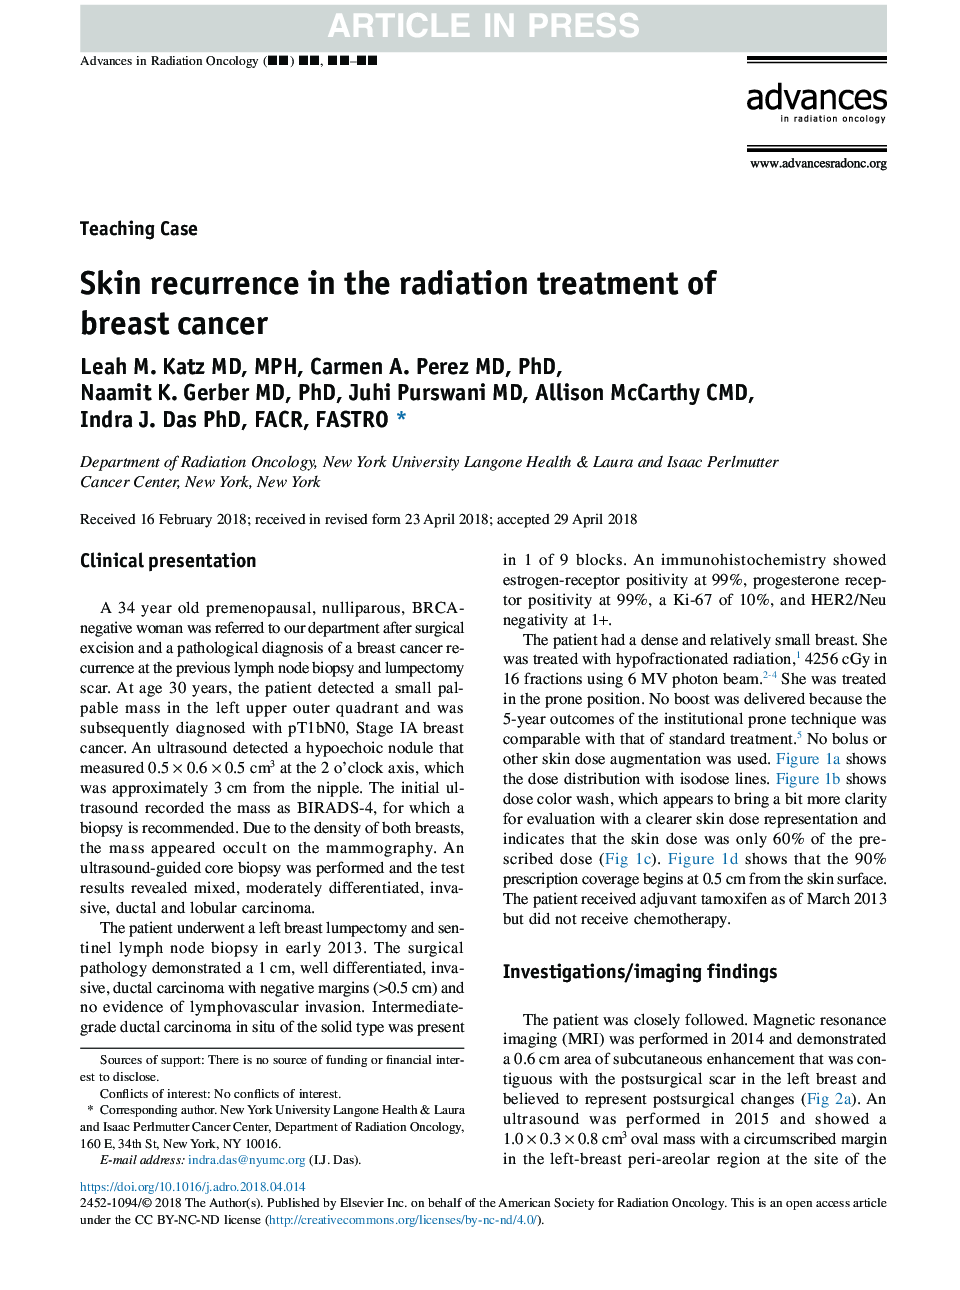 Skin recurrence in the radiation treatment of breast cancer